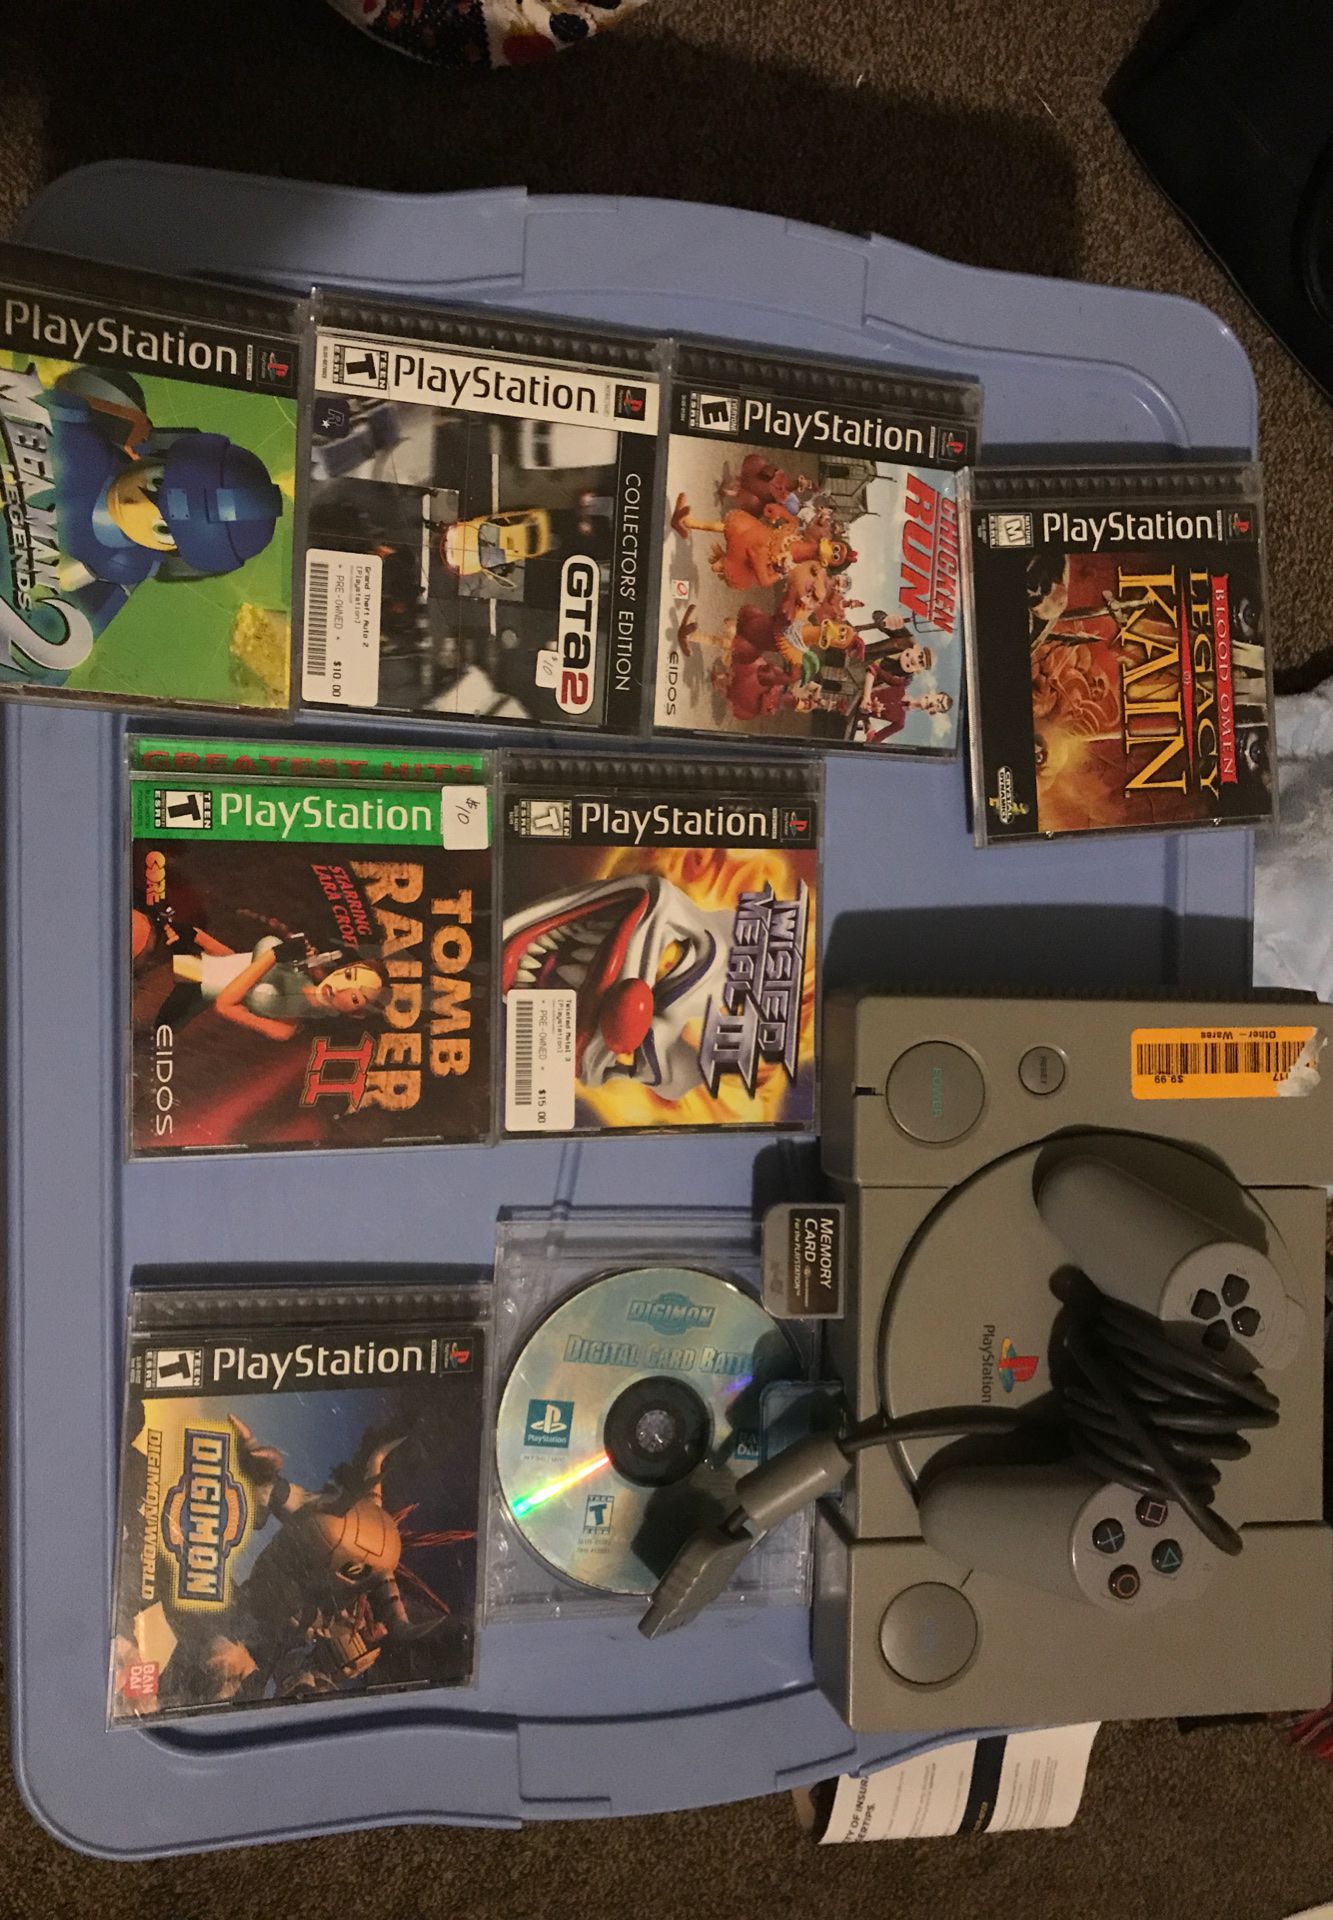 Psx with games